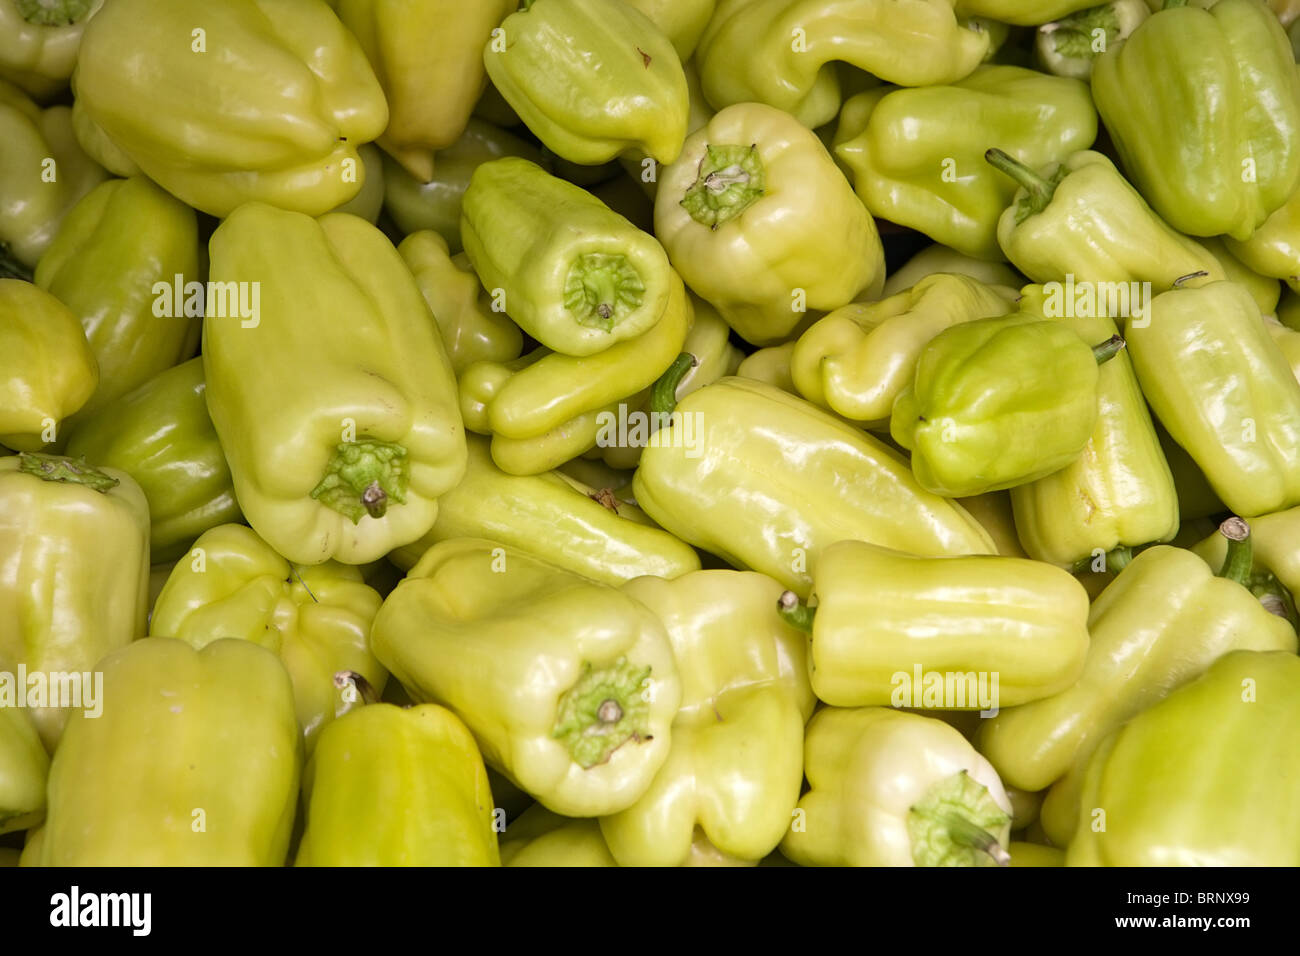 green peppers on the market closeup Stock Photo